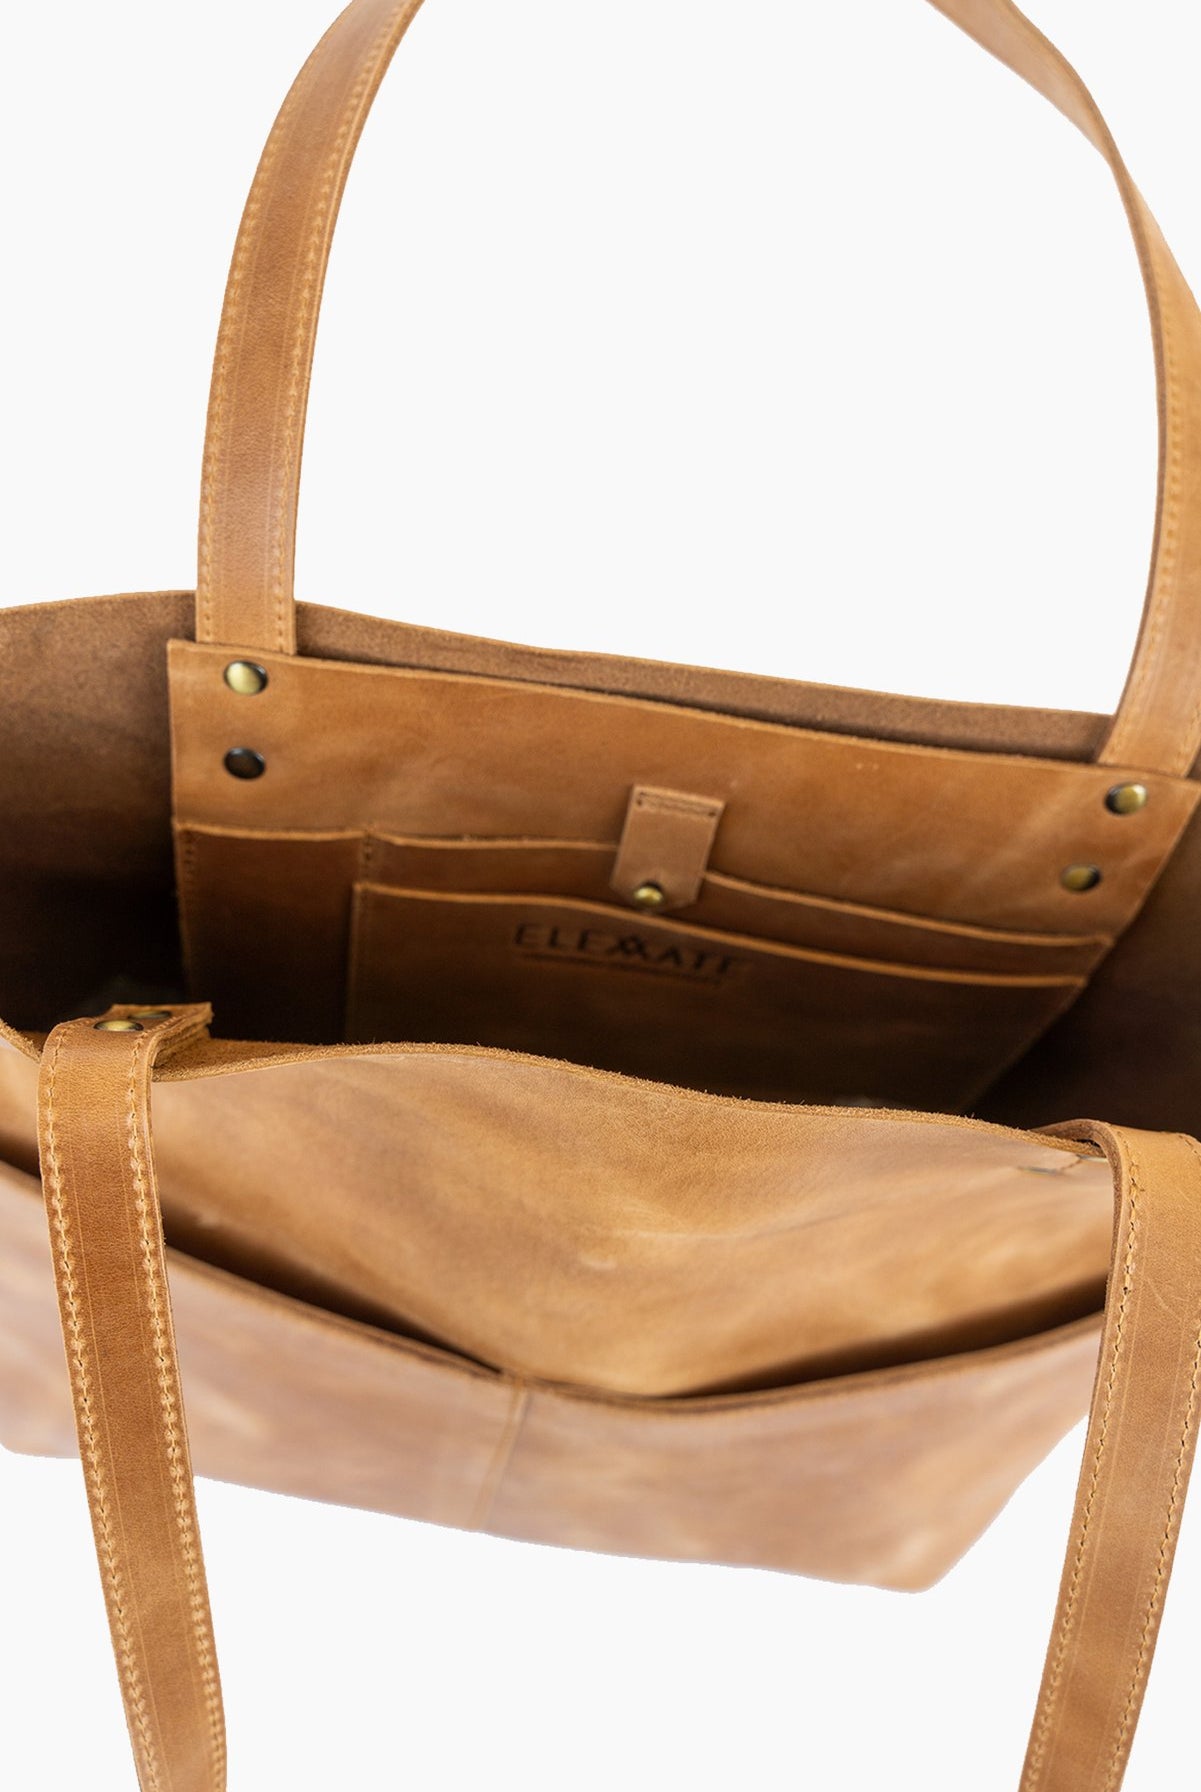 Elevate camel raw tote Raleigh ethical boutique